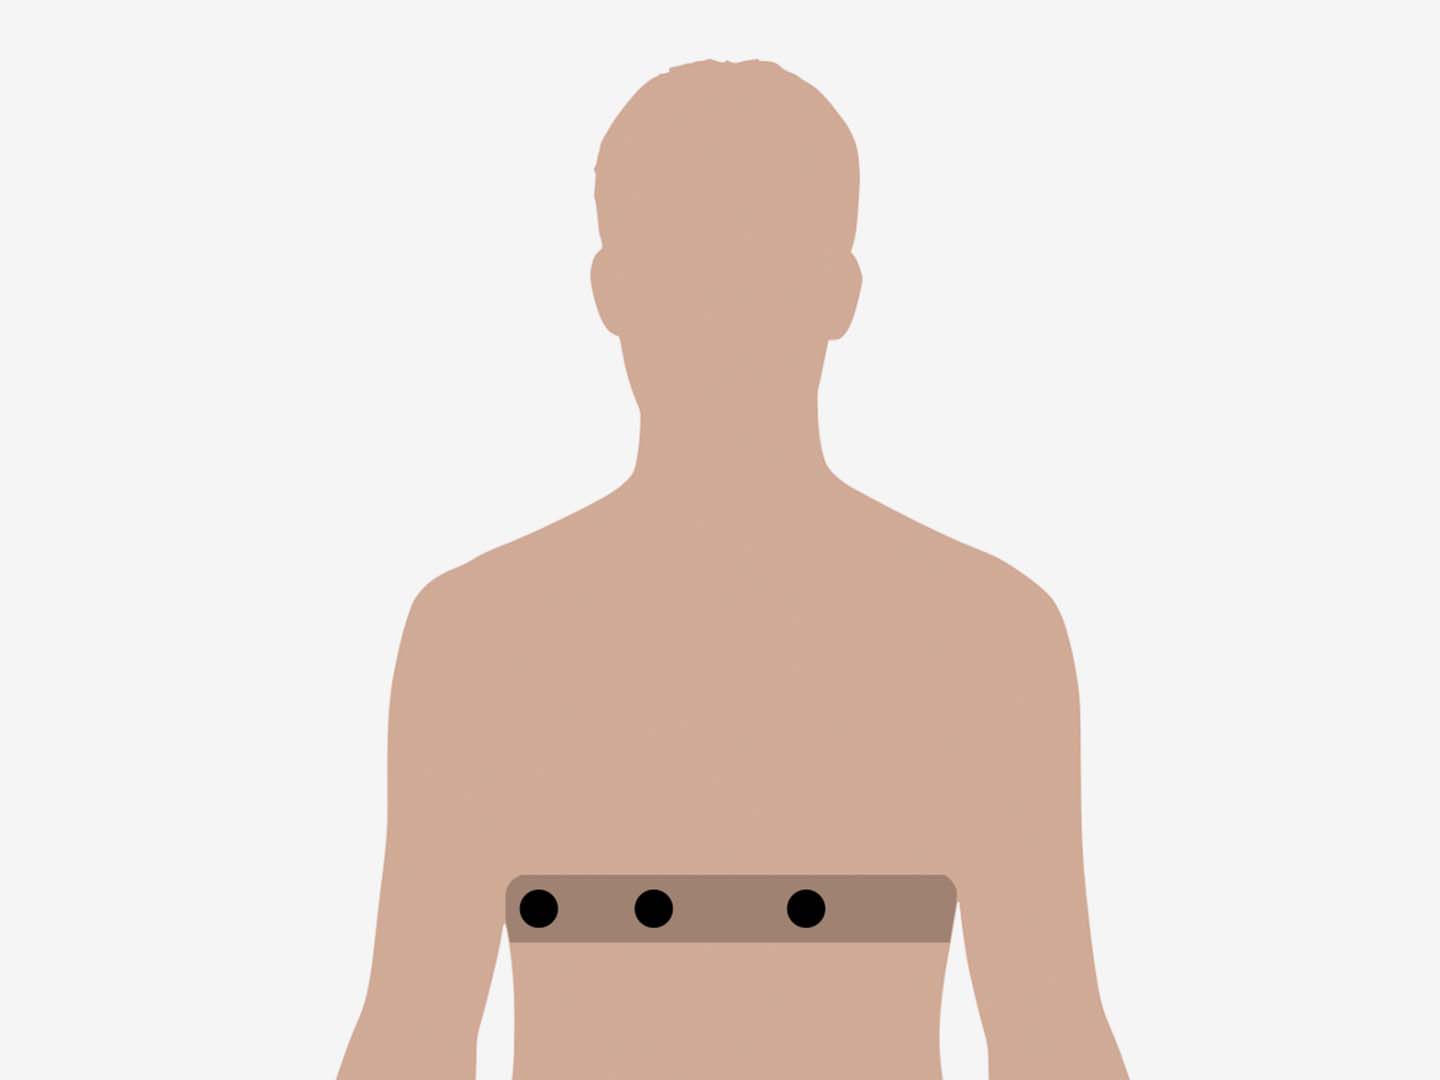 Illustration showing a person from behind up to the shoulders, with a horizontal black bar with three dots superimposed at the lower back area.